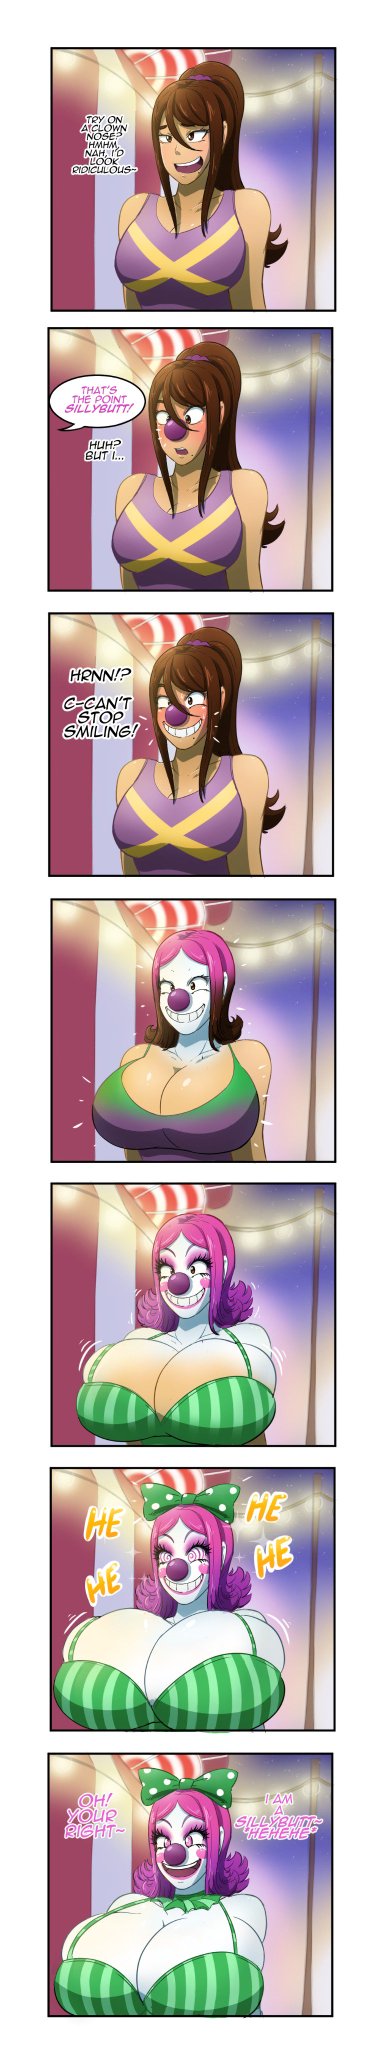 “#clowngirl #TF #Transformation #hypnotized This is the sequence I used to ...